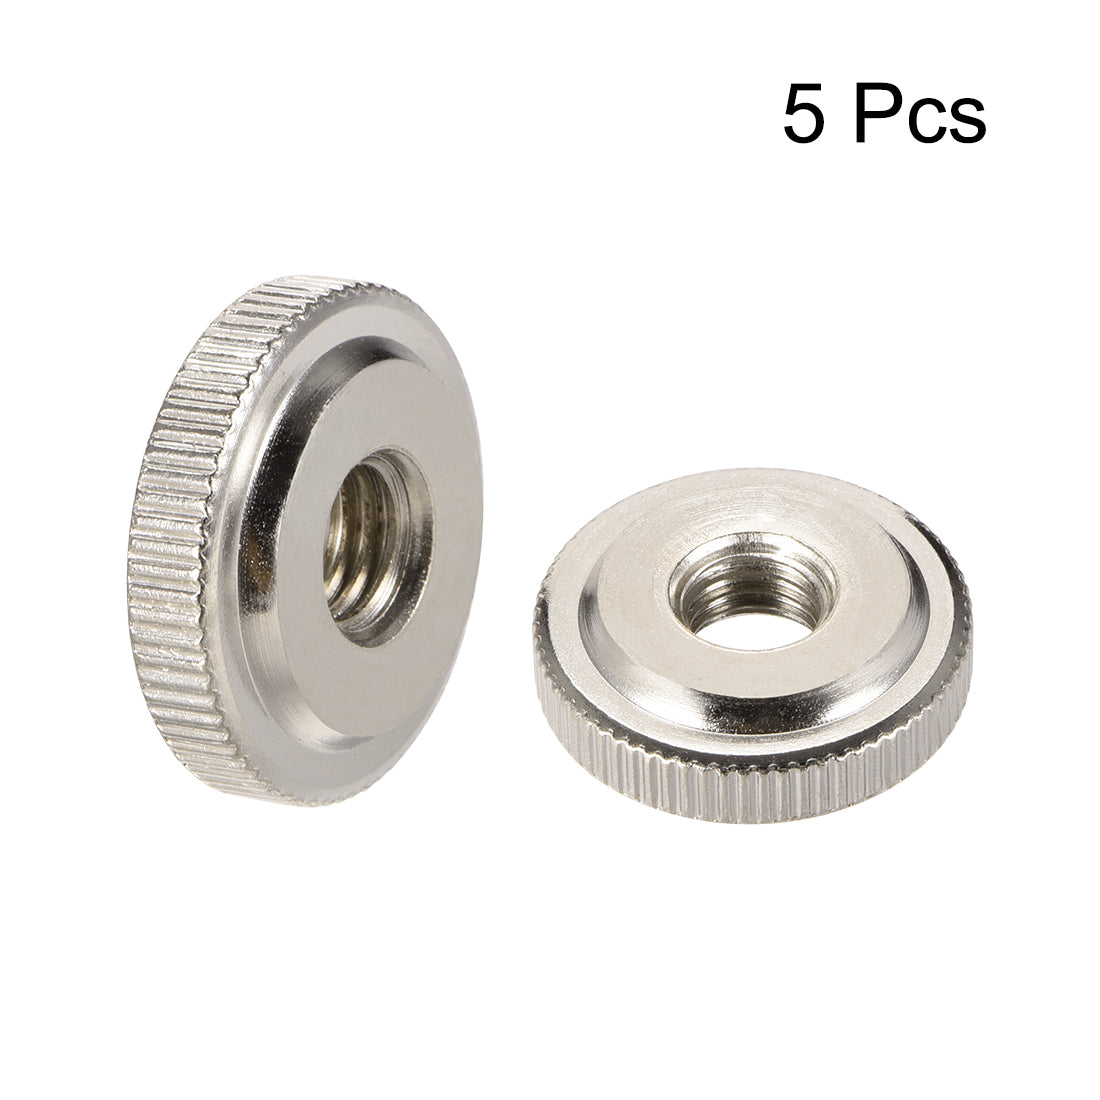 uxcell Uxcell Knurled Thumb Nuts, M10 Female Threaded Thin Type, Nickel Plating, 5 Pcs